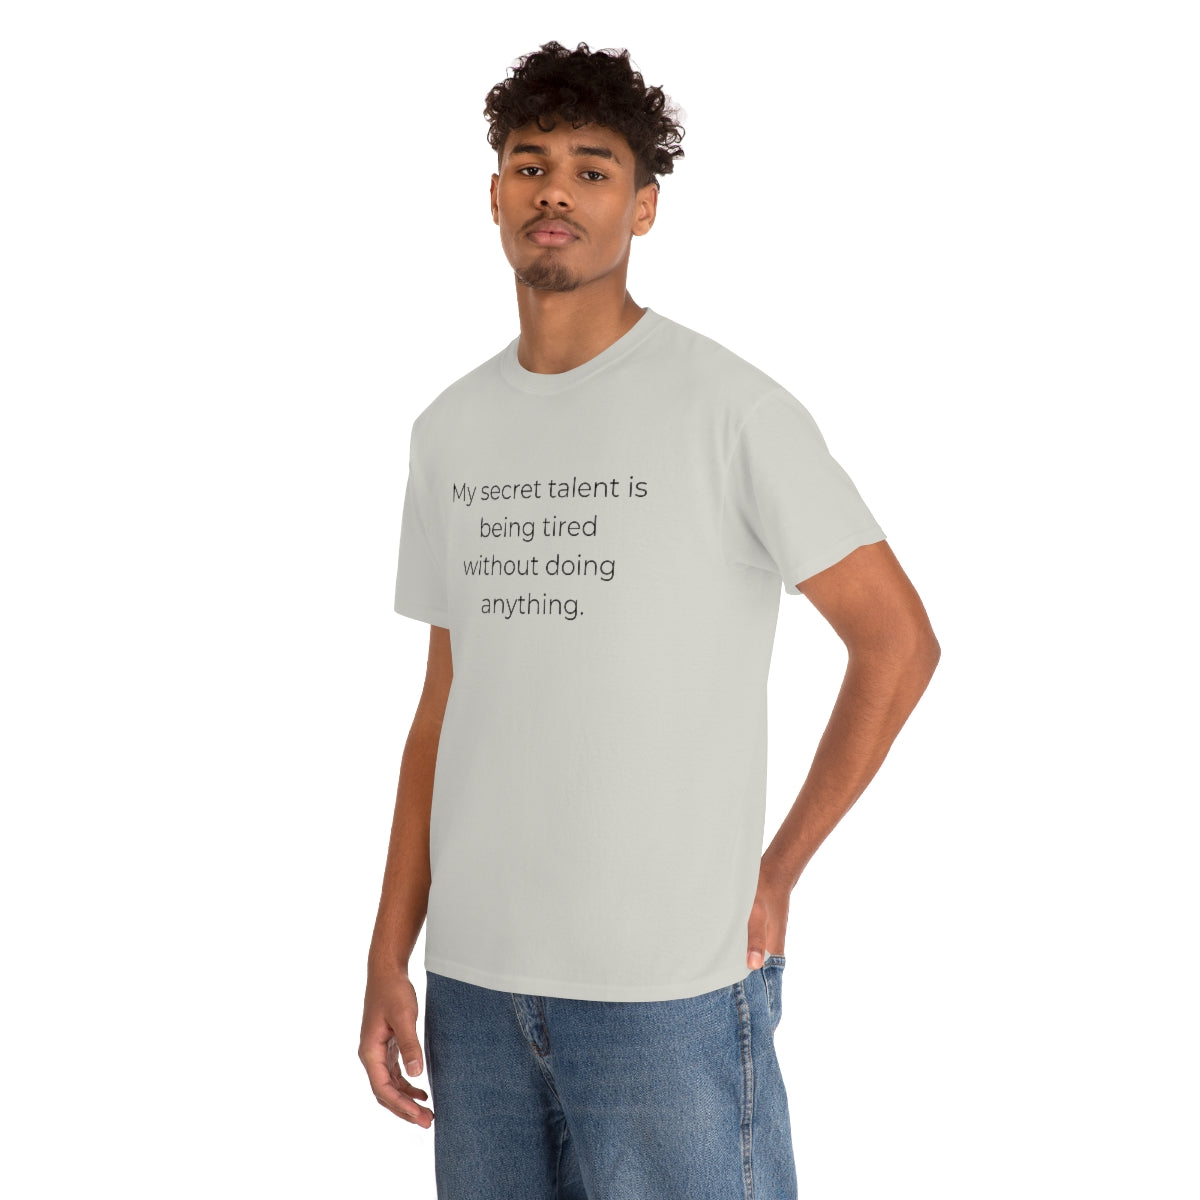 Tired Mom, Chronic Pain, Funny Tshirts, Chronic Pain Shirts, Tired Student Shirt, Tired As A Mother T-Shirt, Tired Shirt, Always Tired - The Good Life Vibe